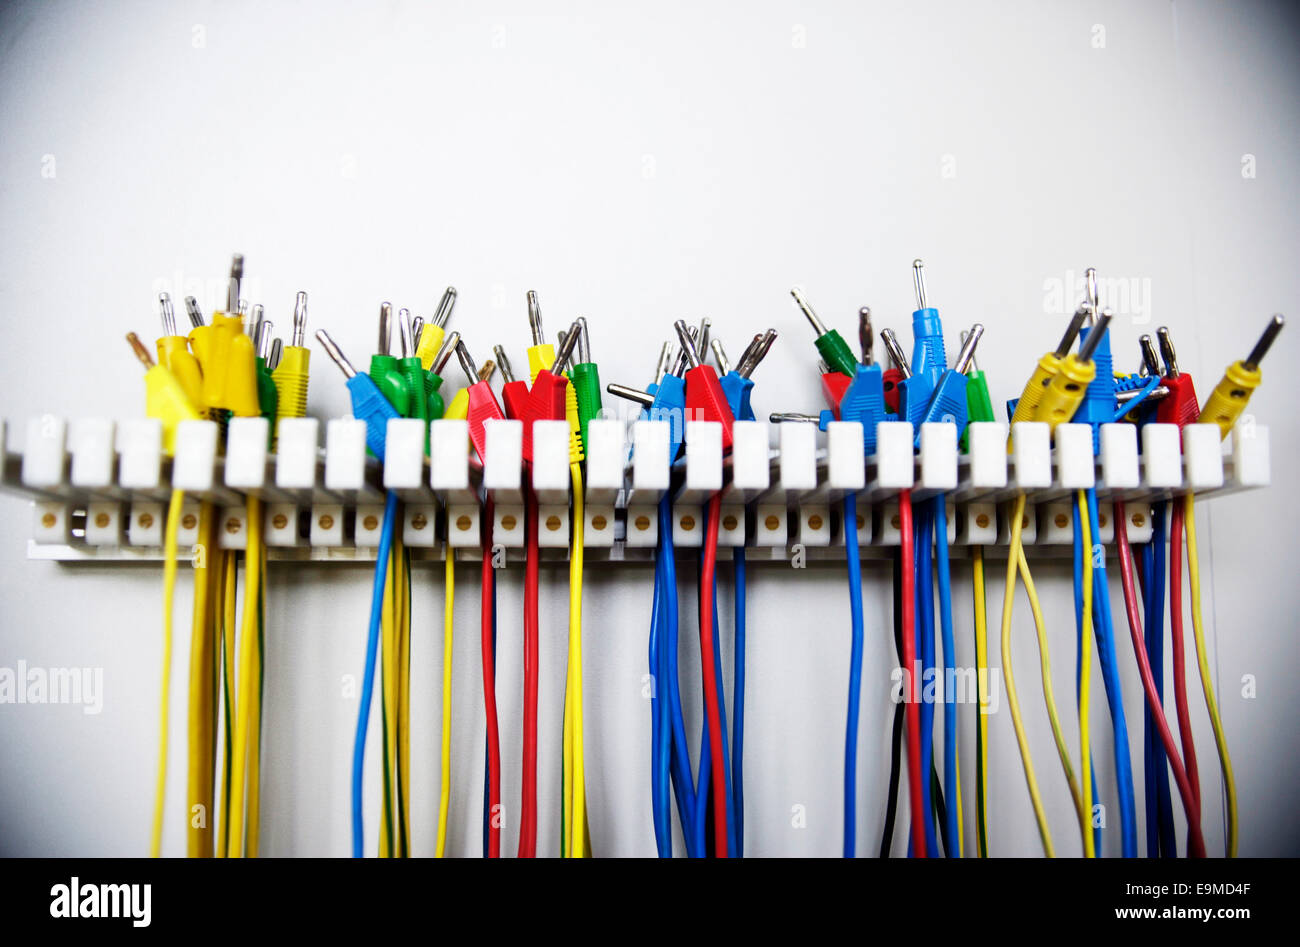 Several colorful cables hung on a stand Stock Photo